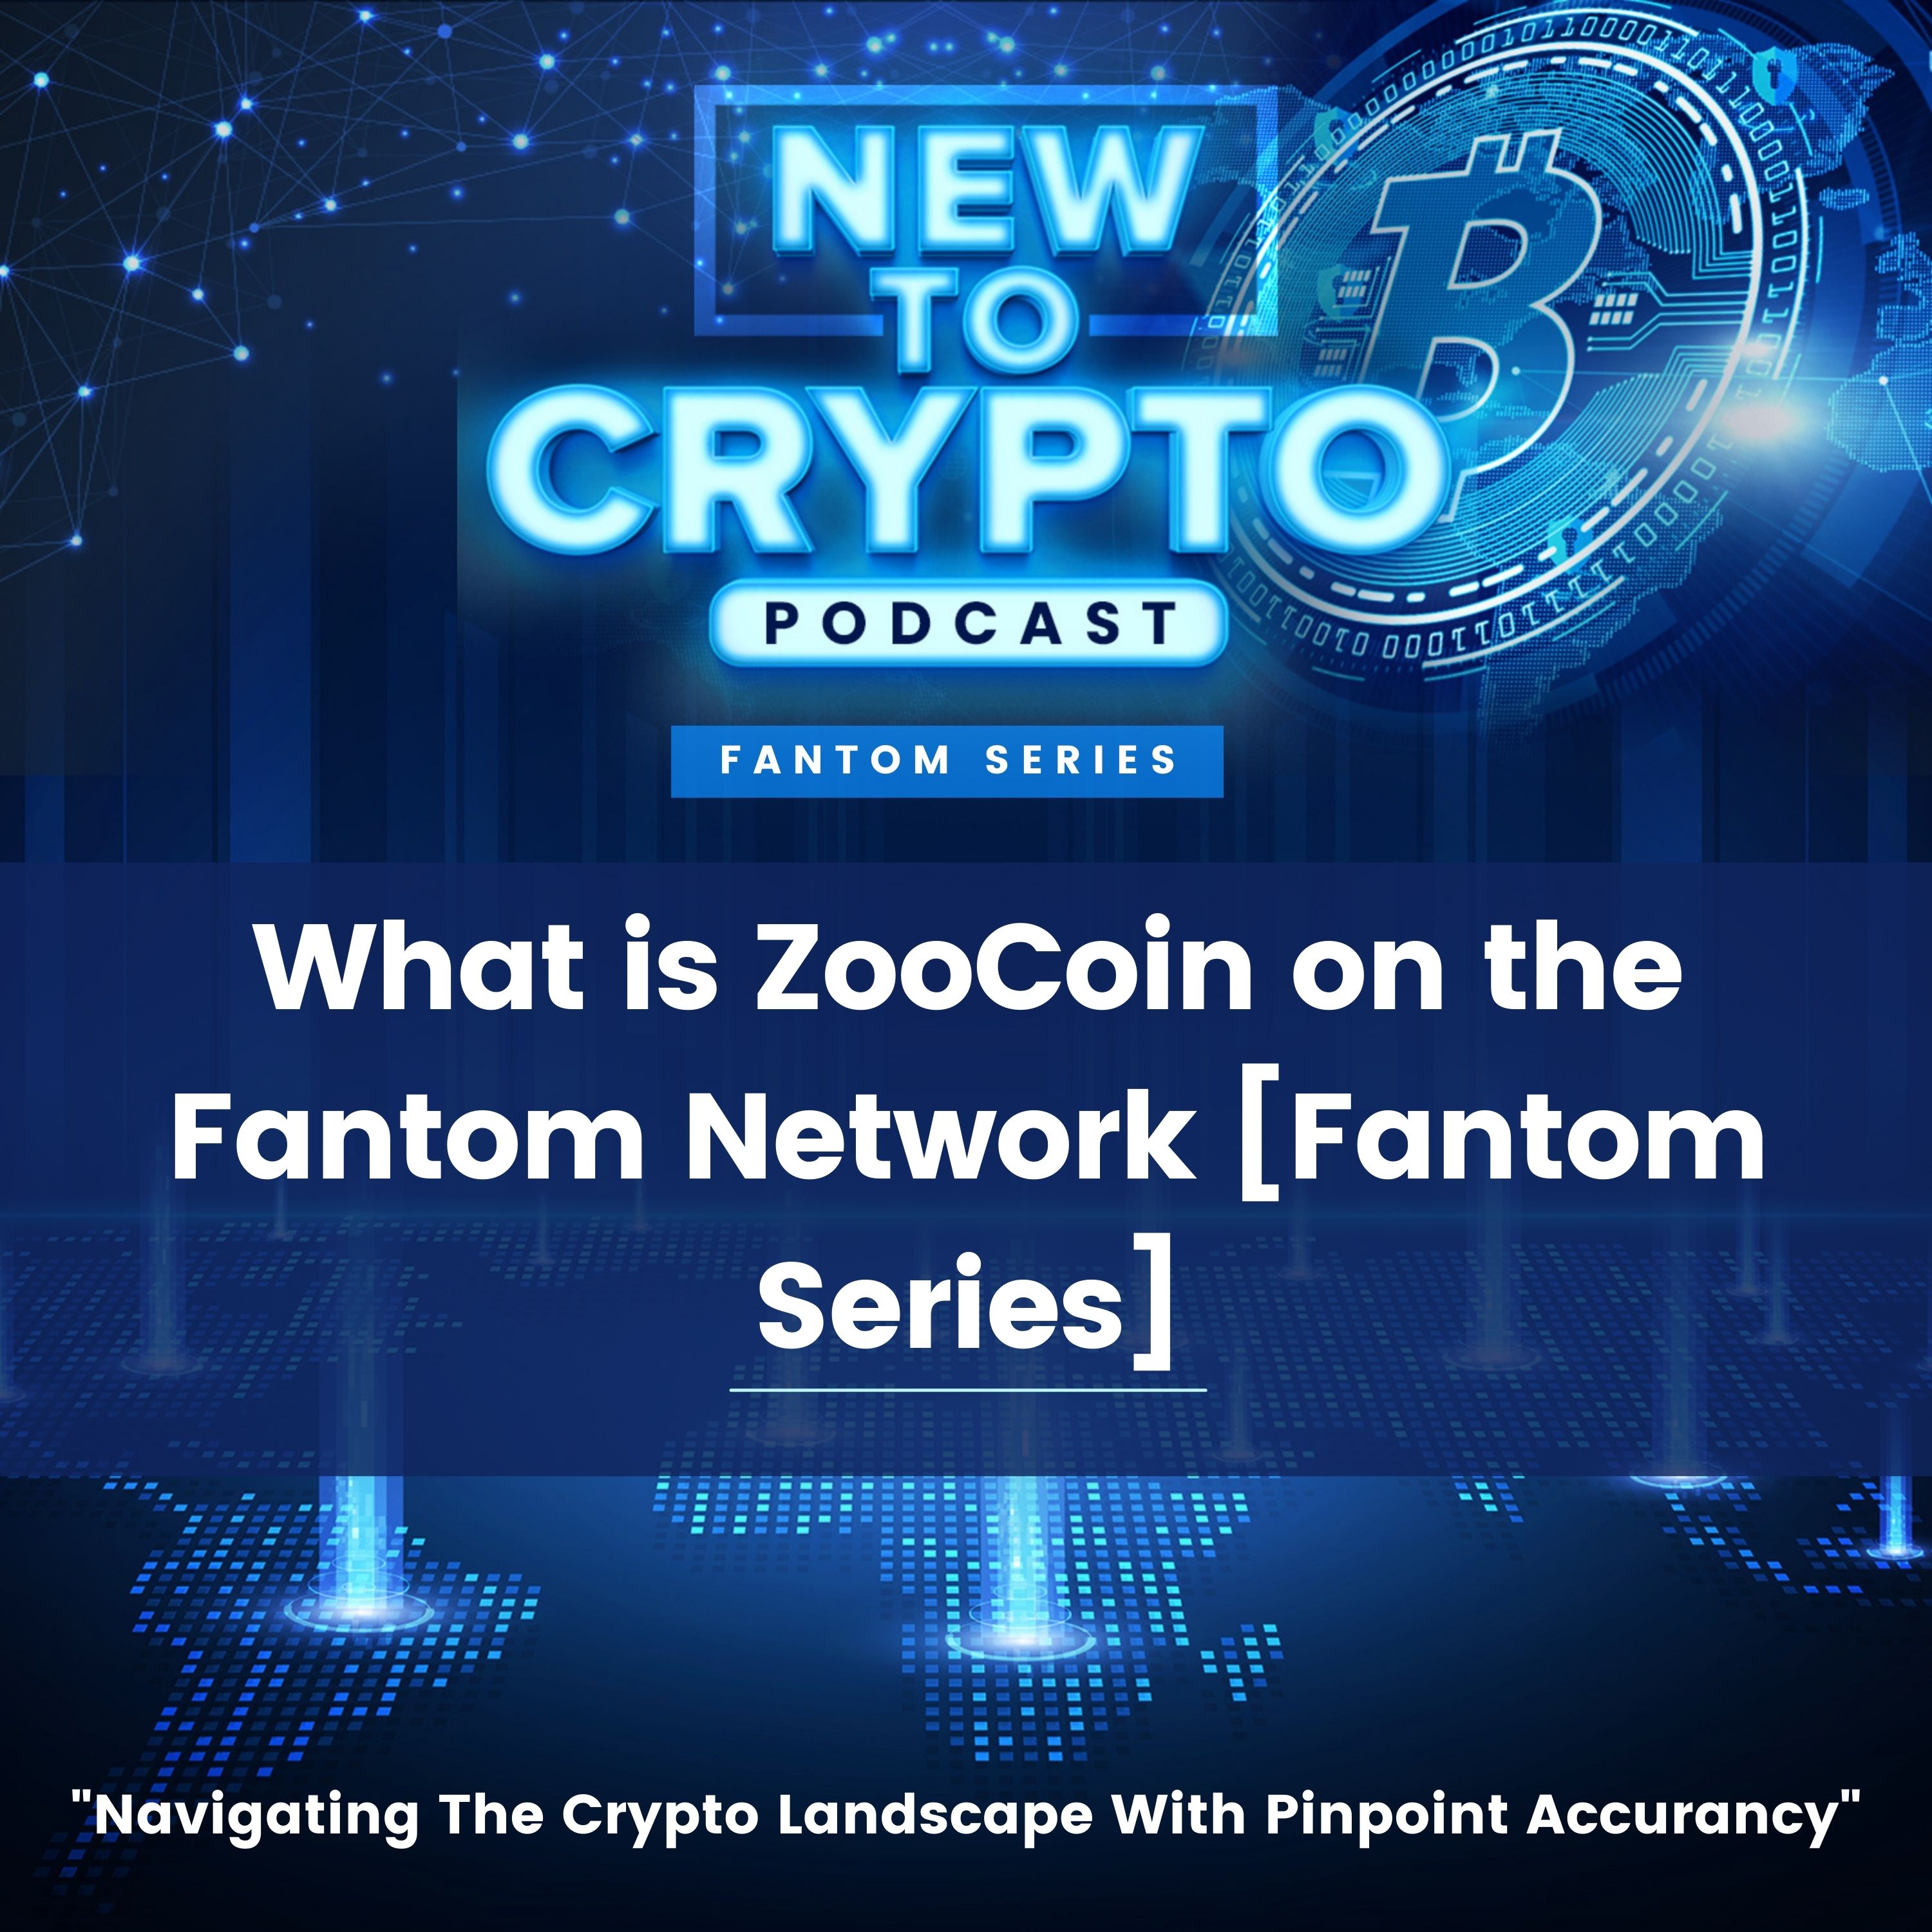 What is ZooCoin on the Fantom Network [Fantom Series]